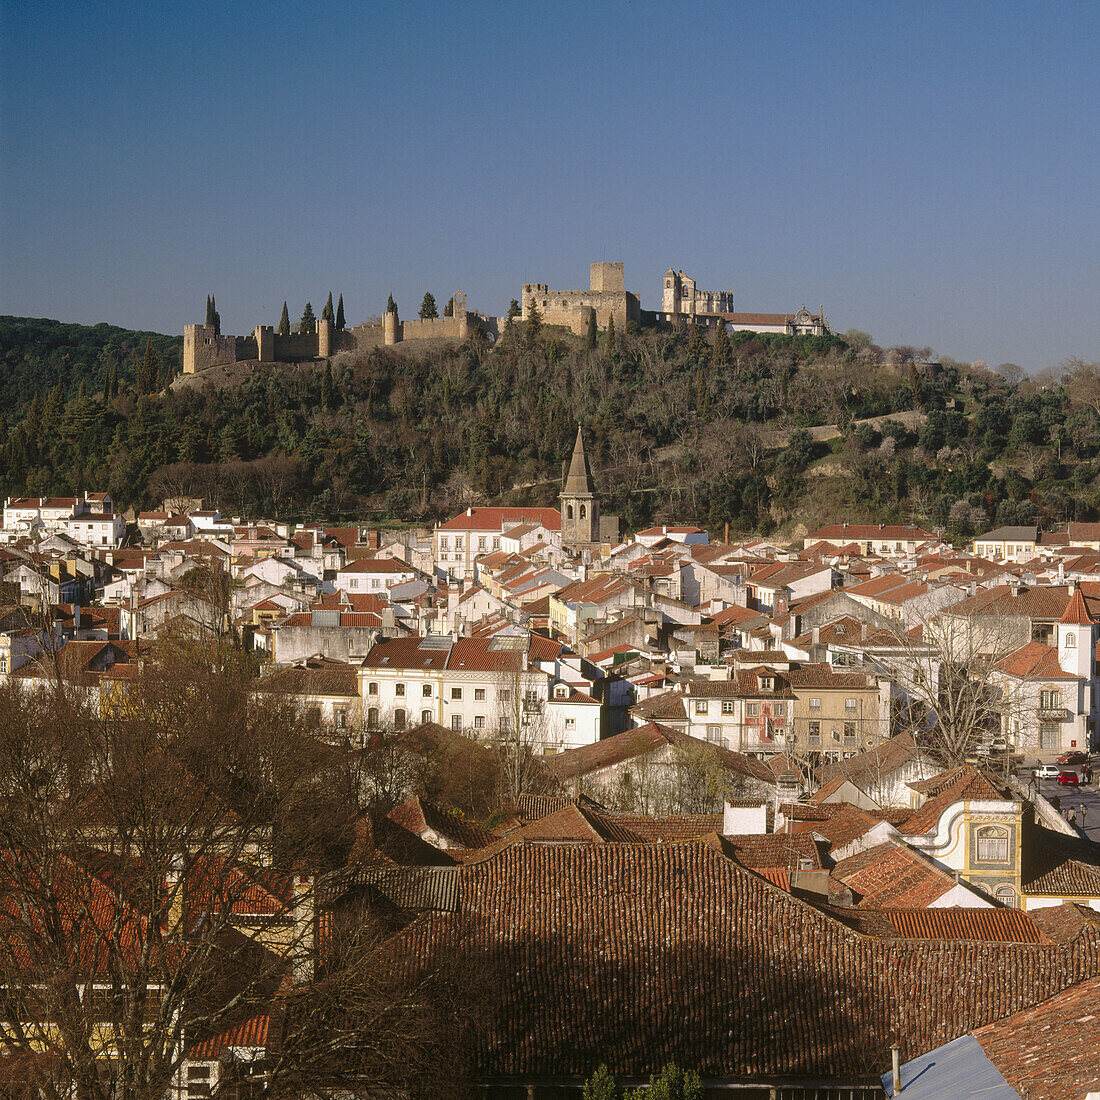 City and Church of the Convent of Christ, Tomar. Portugal